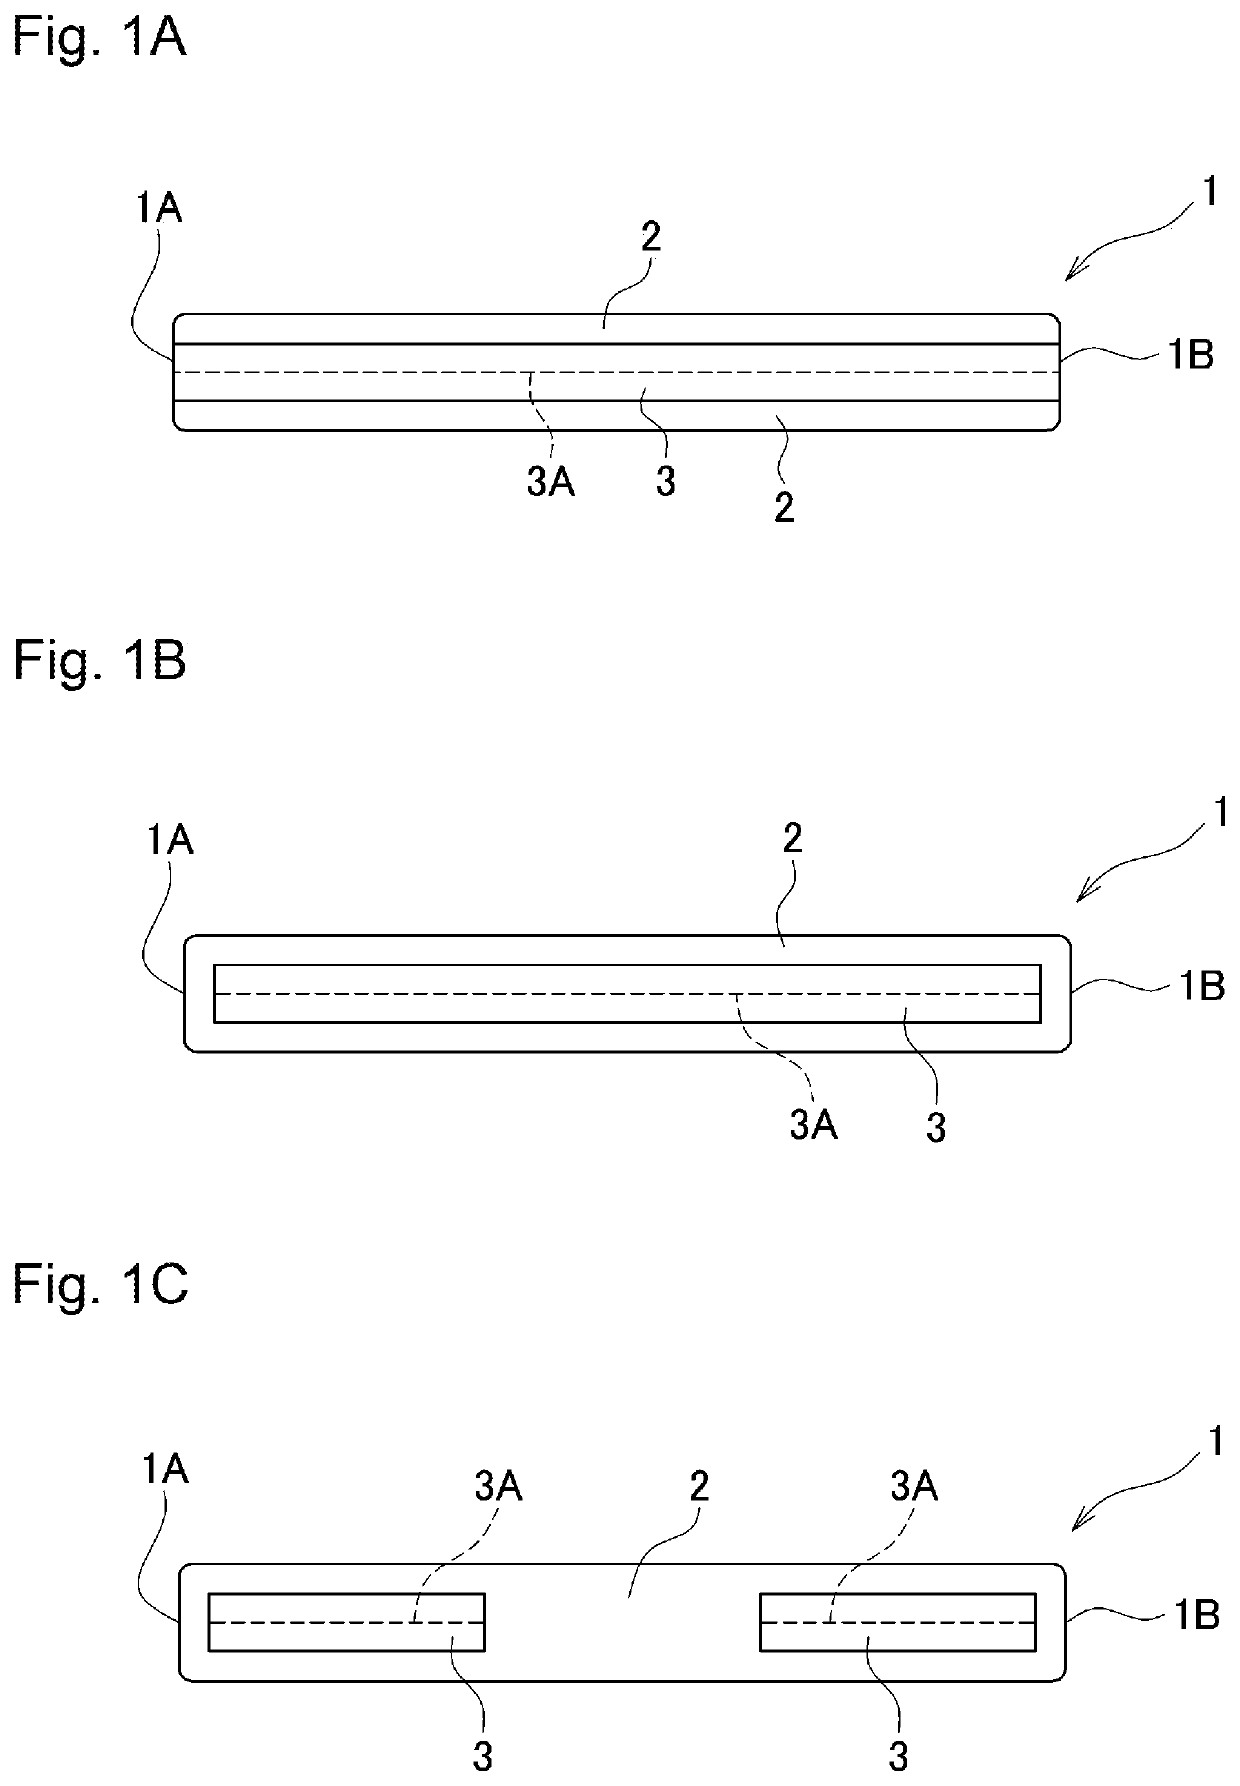 Adhesive plaster structure for treating wounds caused by ingrown nails